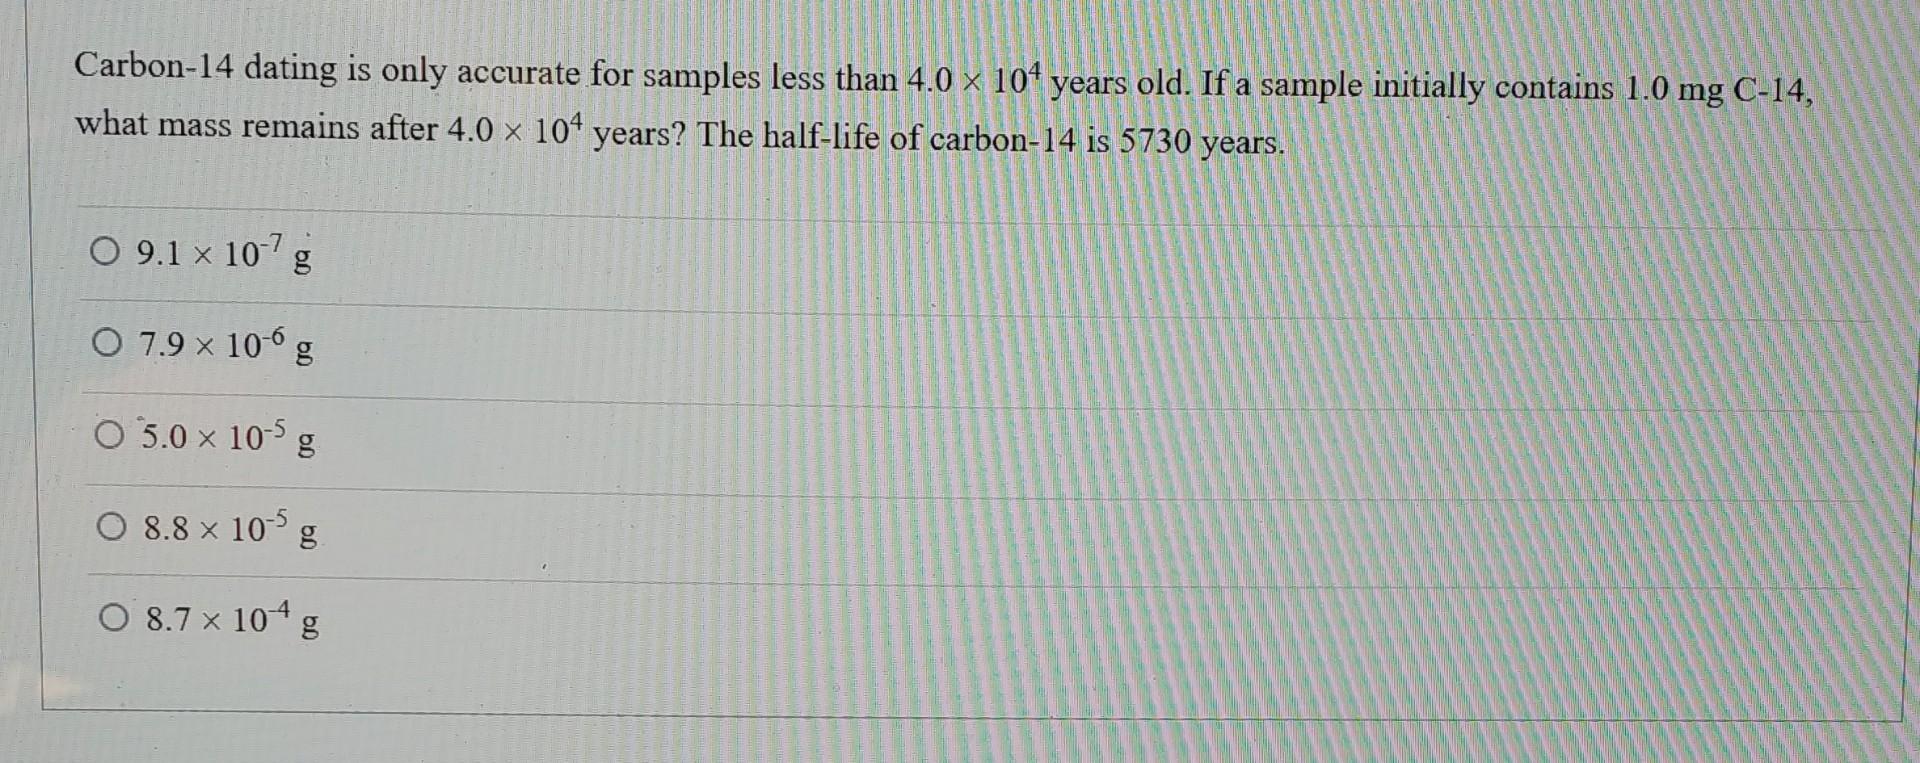 Carbon-14 dating is only accurate for samples less than 4.0  104 years old. If a sample initially contains